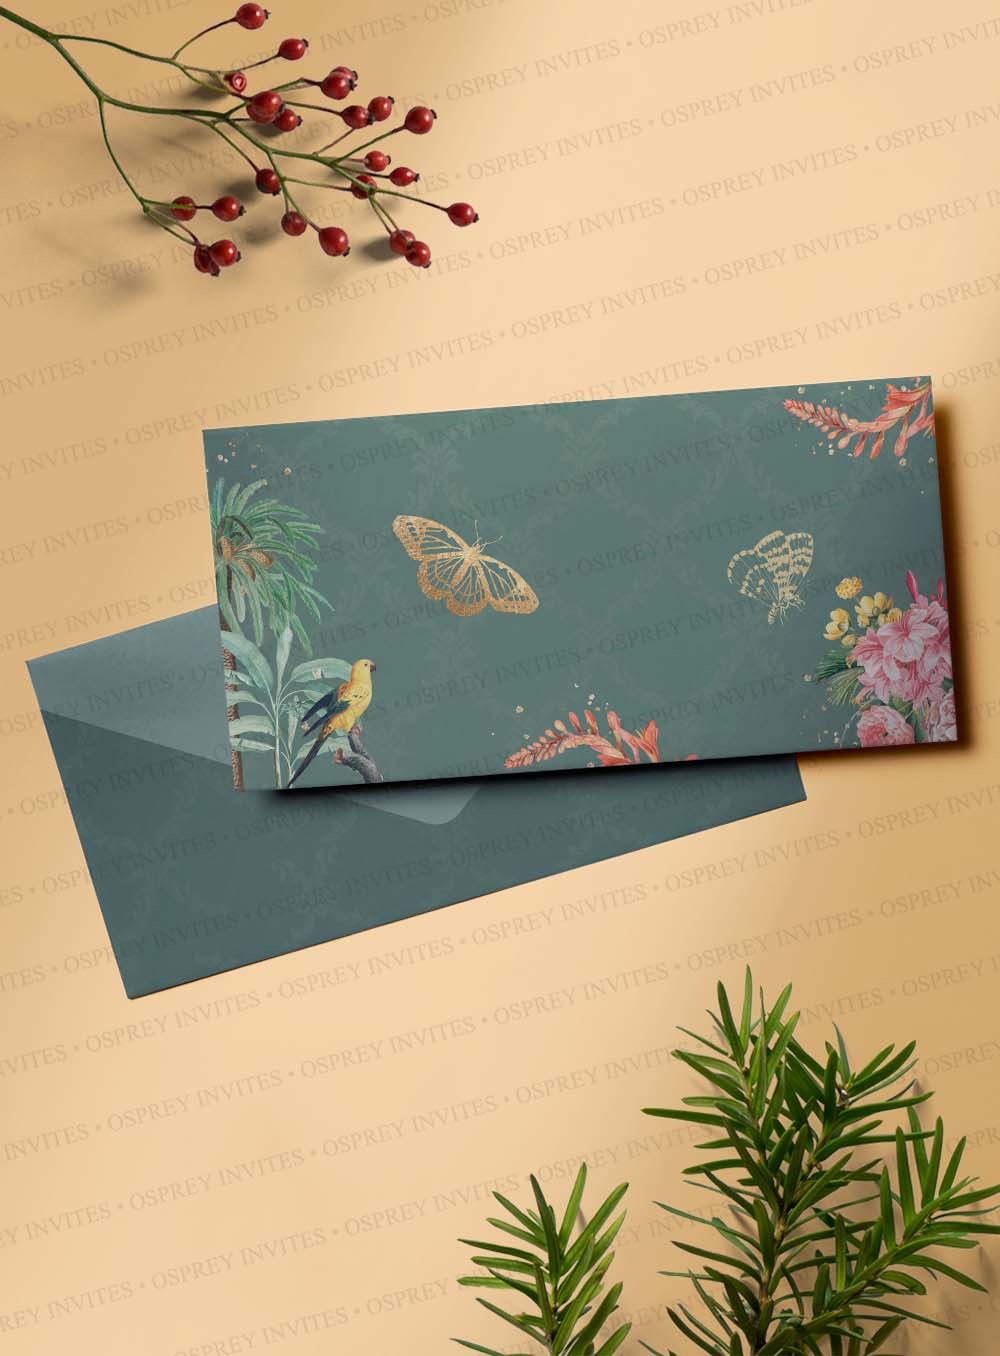 Beautiful money envelopes design for Indian weddings with hand-illustrated birds design, this money envelopes design part of a wedding stationery collection customized with the family names of the bride and groom.